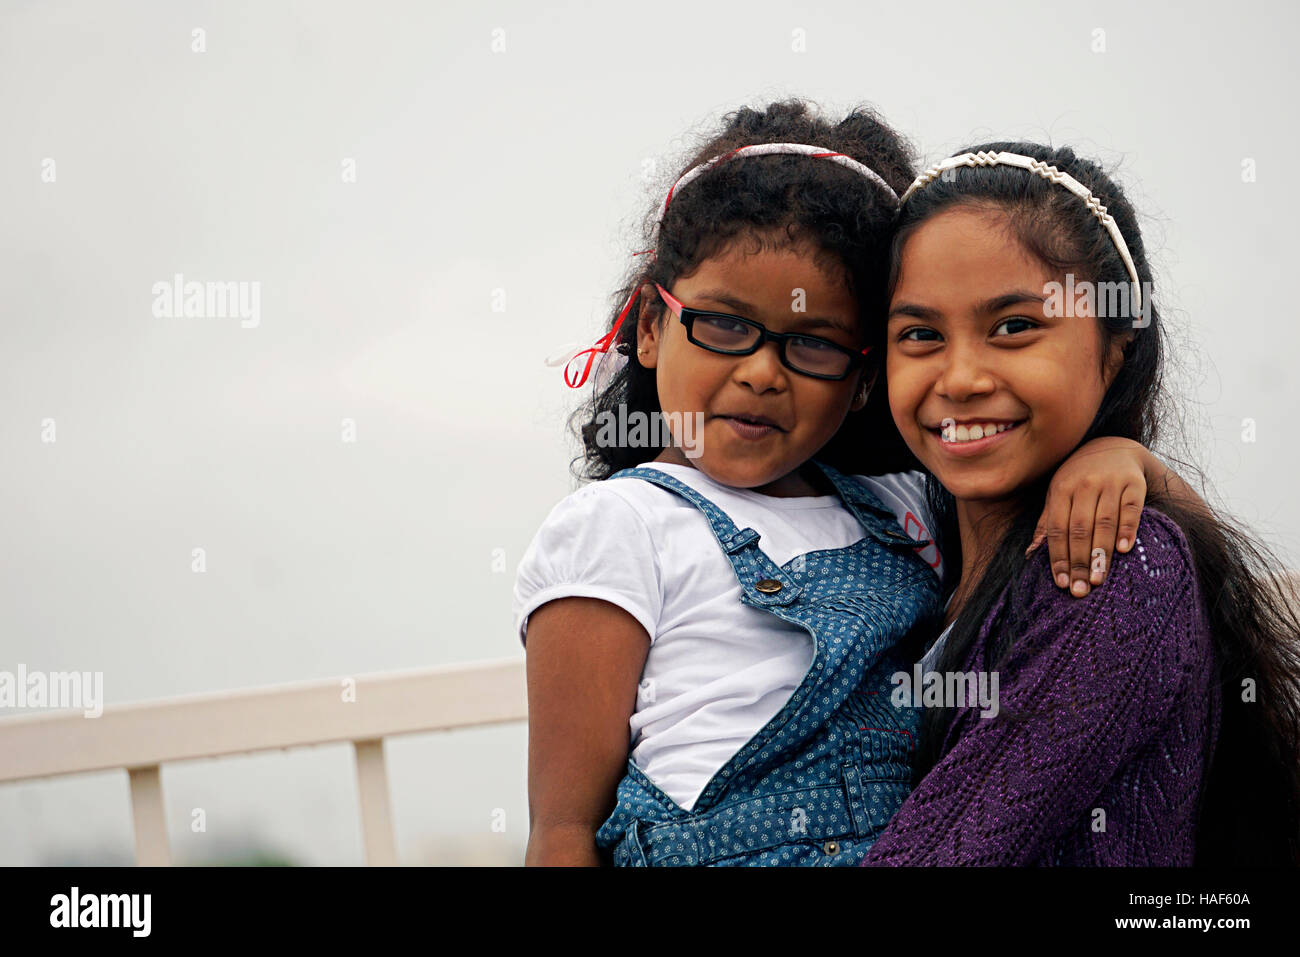 Two young girl hugging and laughing, Pune, Maharashtra. Stock Photo